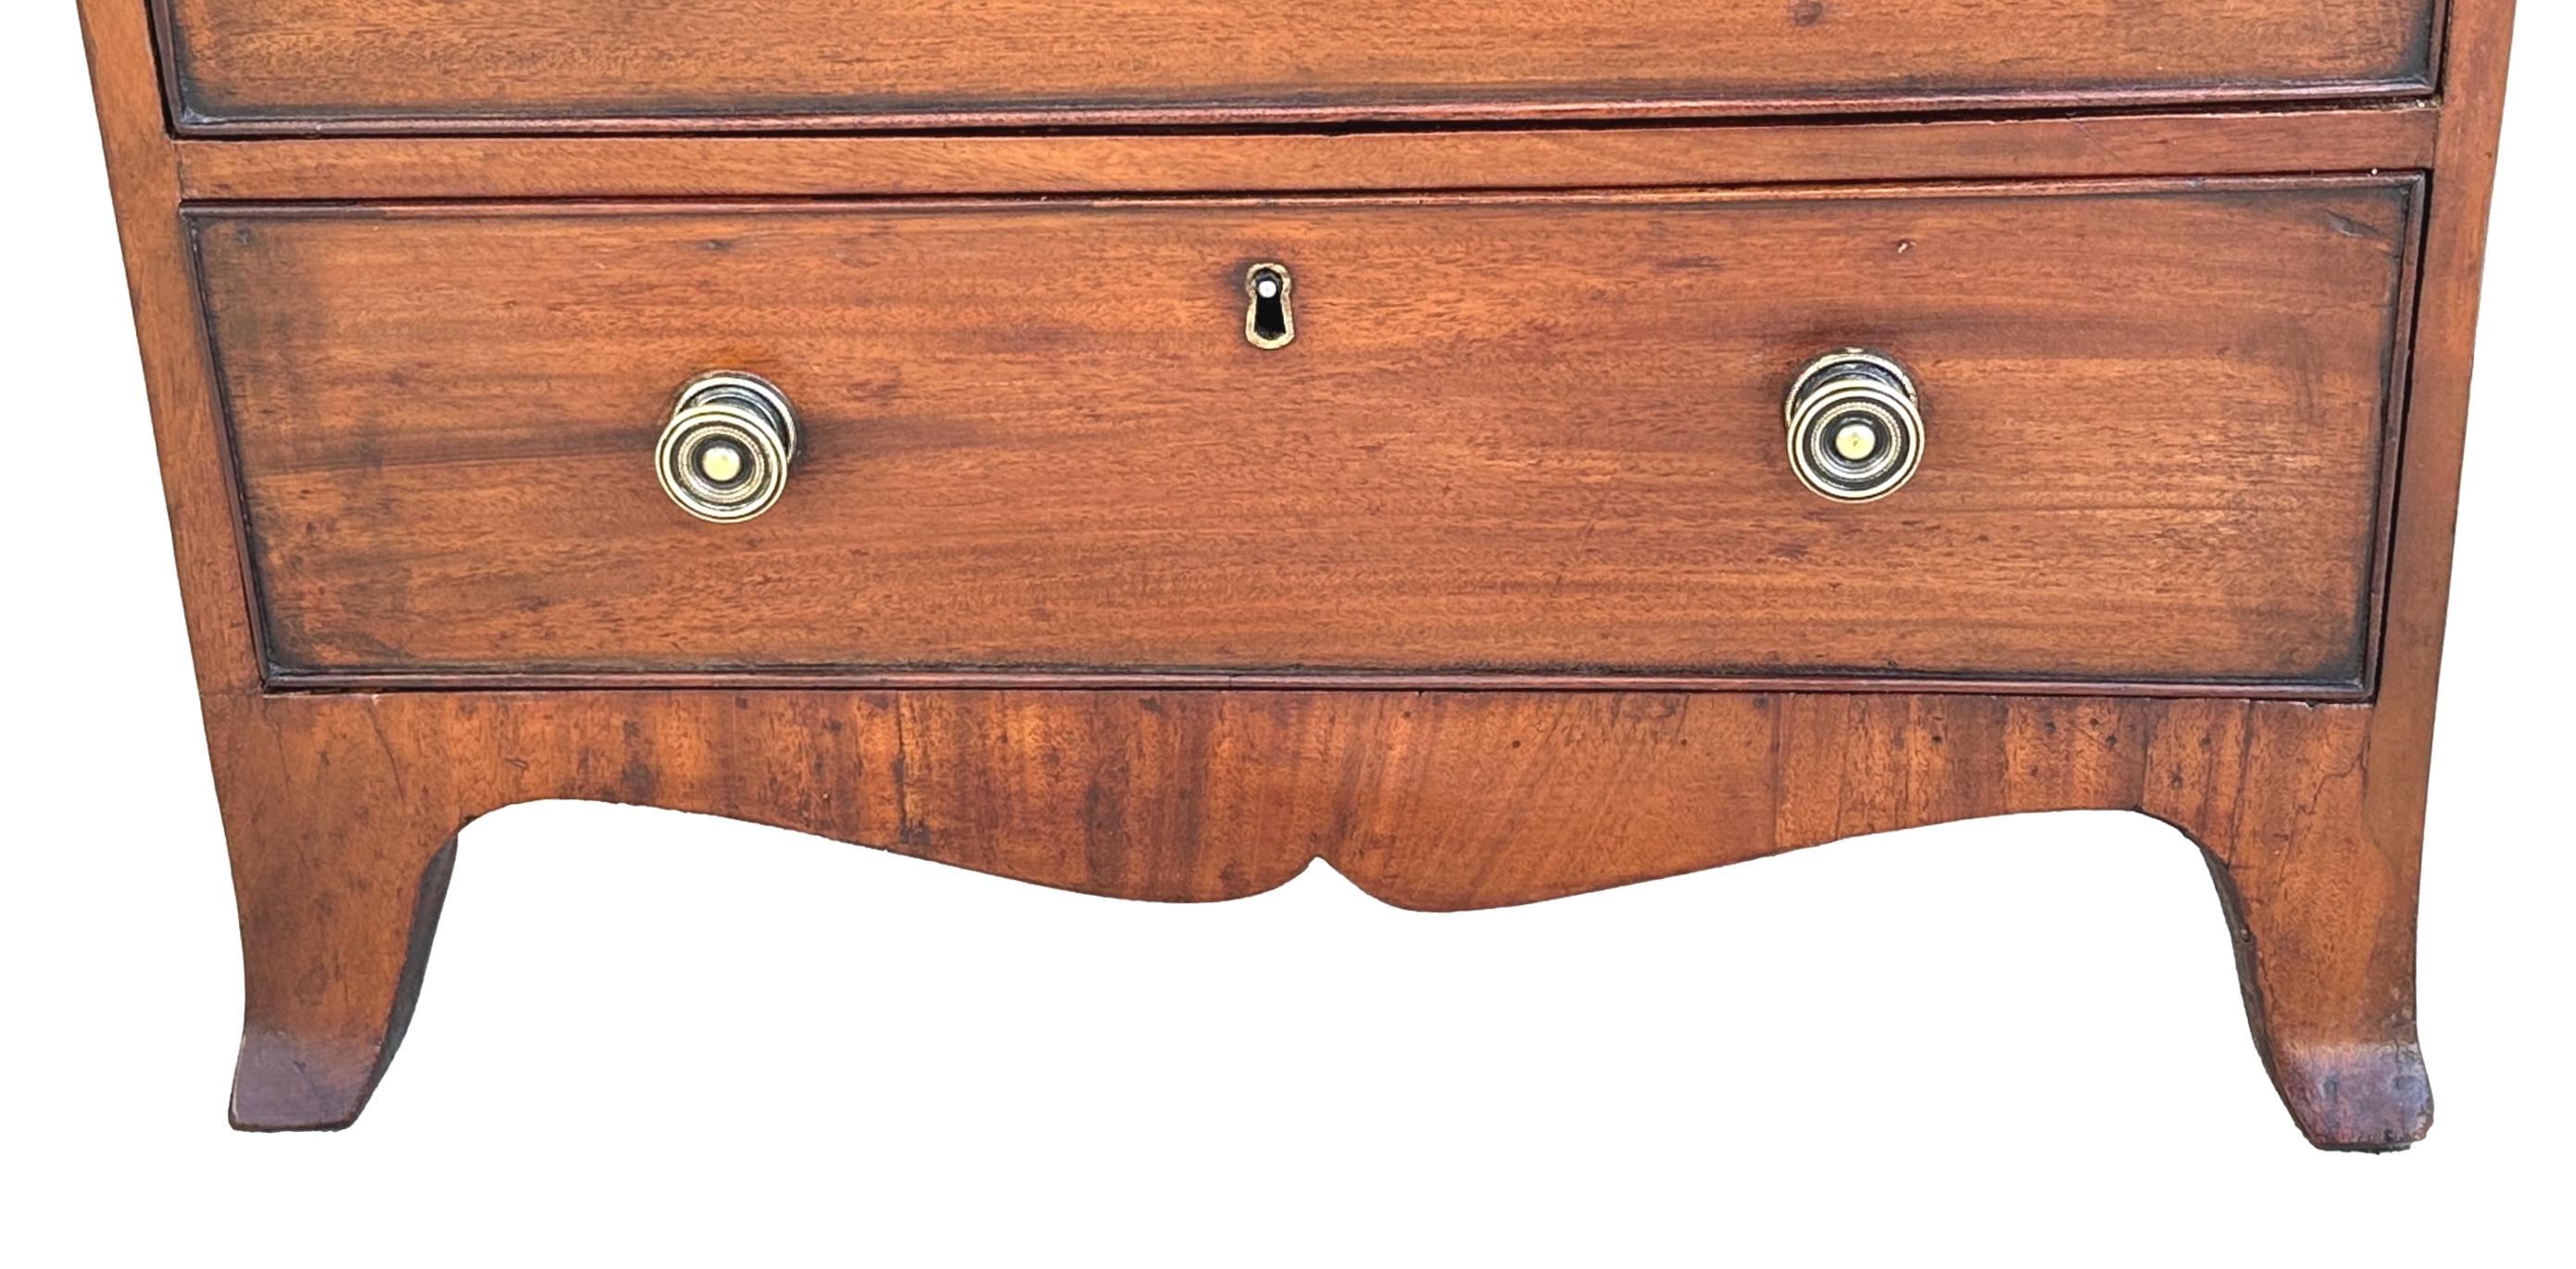 Regency Mahogany Childs Chest of Drawers In Good Condition For Sale In Bedfordshire, GB